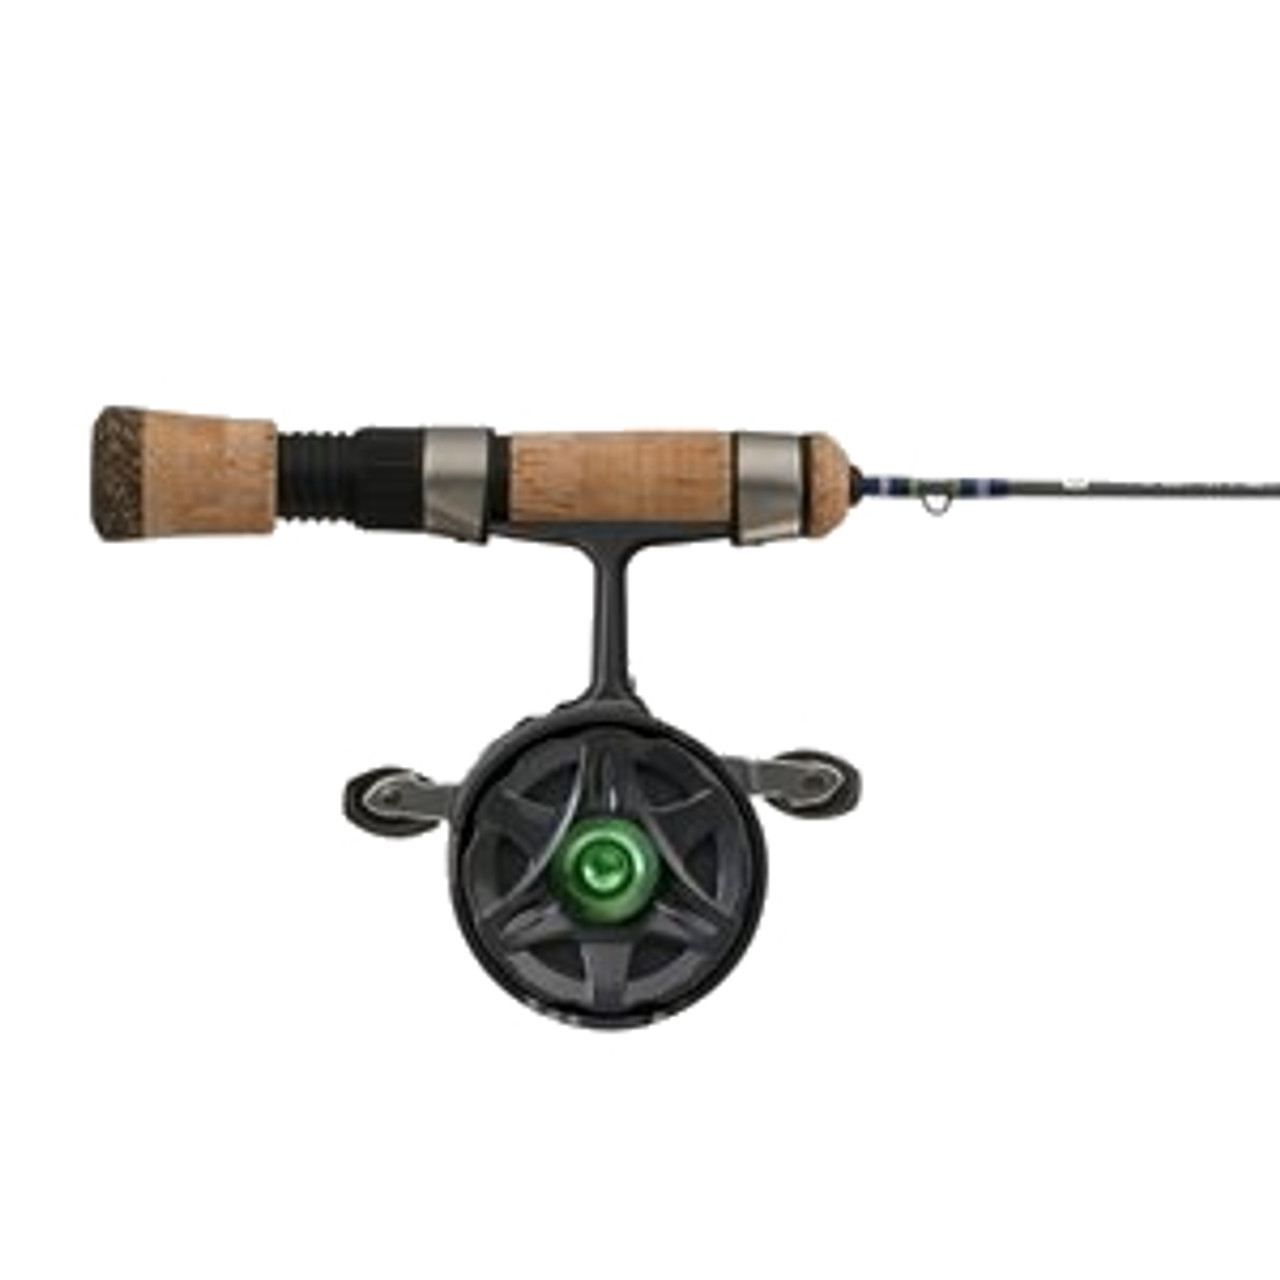  13 FISHING - The Snitch Pro Spinning Ice Fishing Combo - 23  with Flex-Core Quick Action Tip - SNPC-23 : Sports & Outdoors